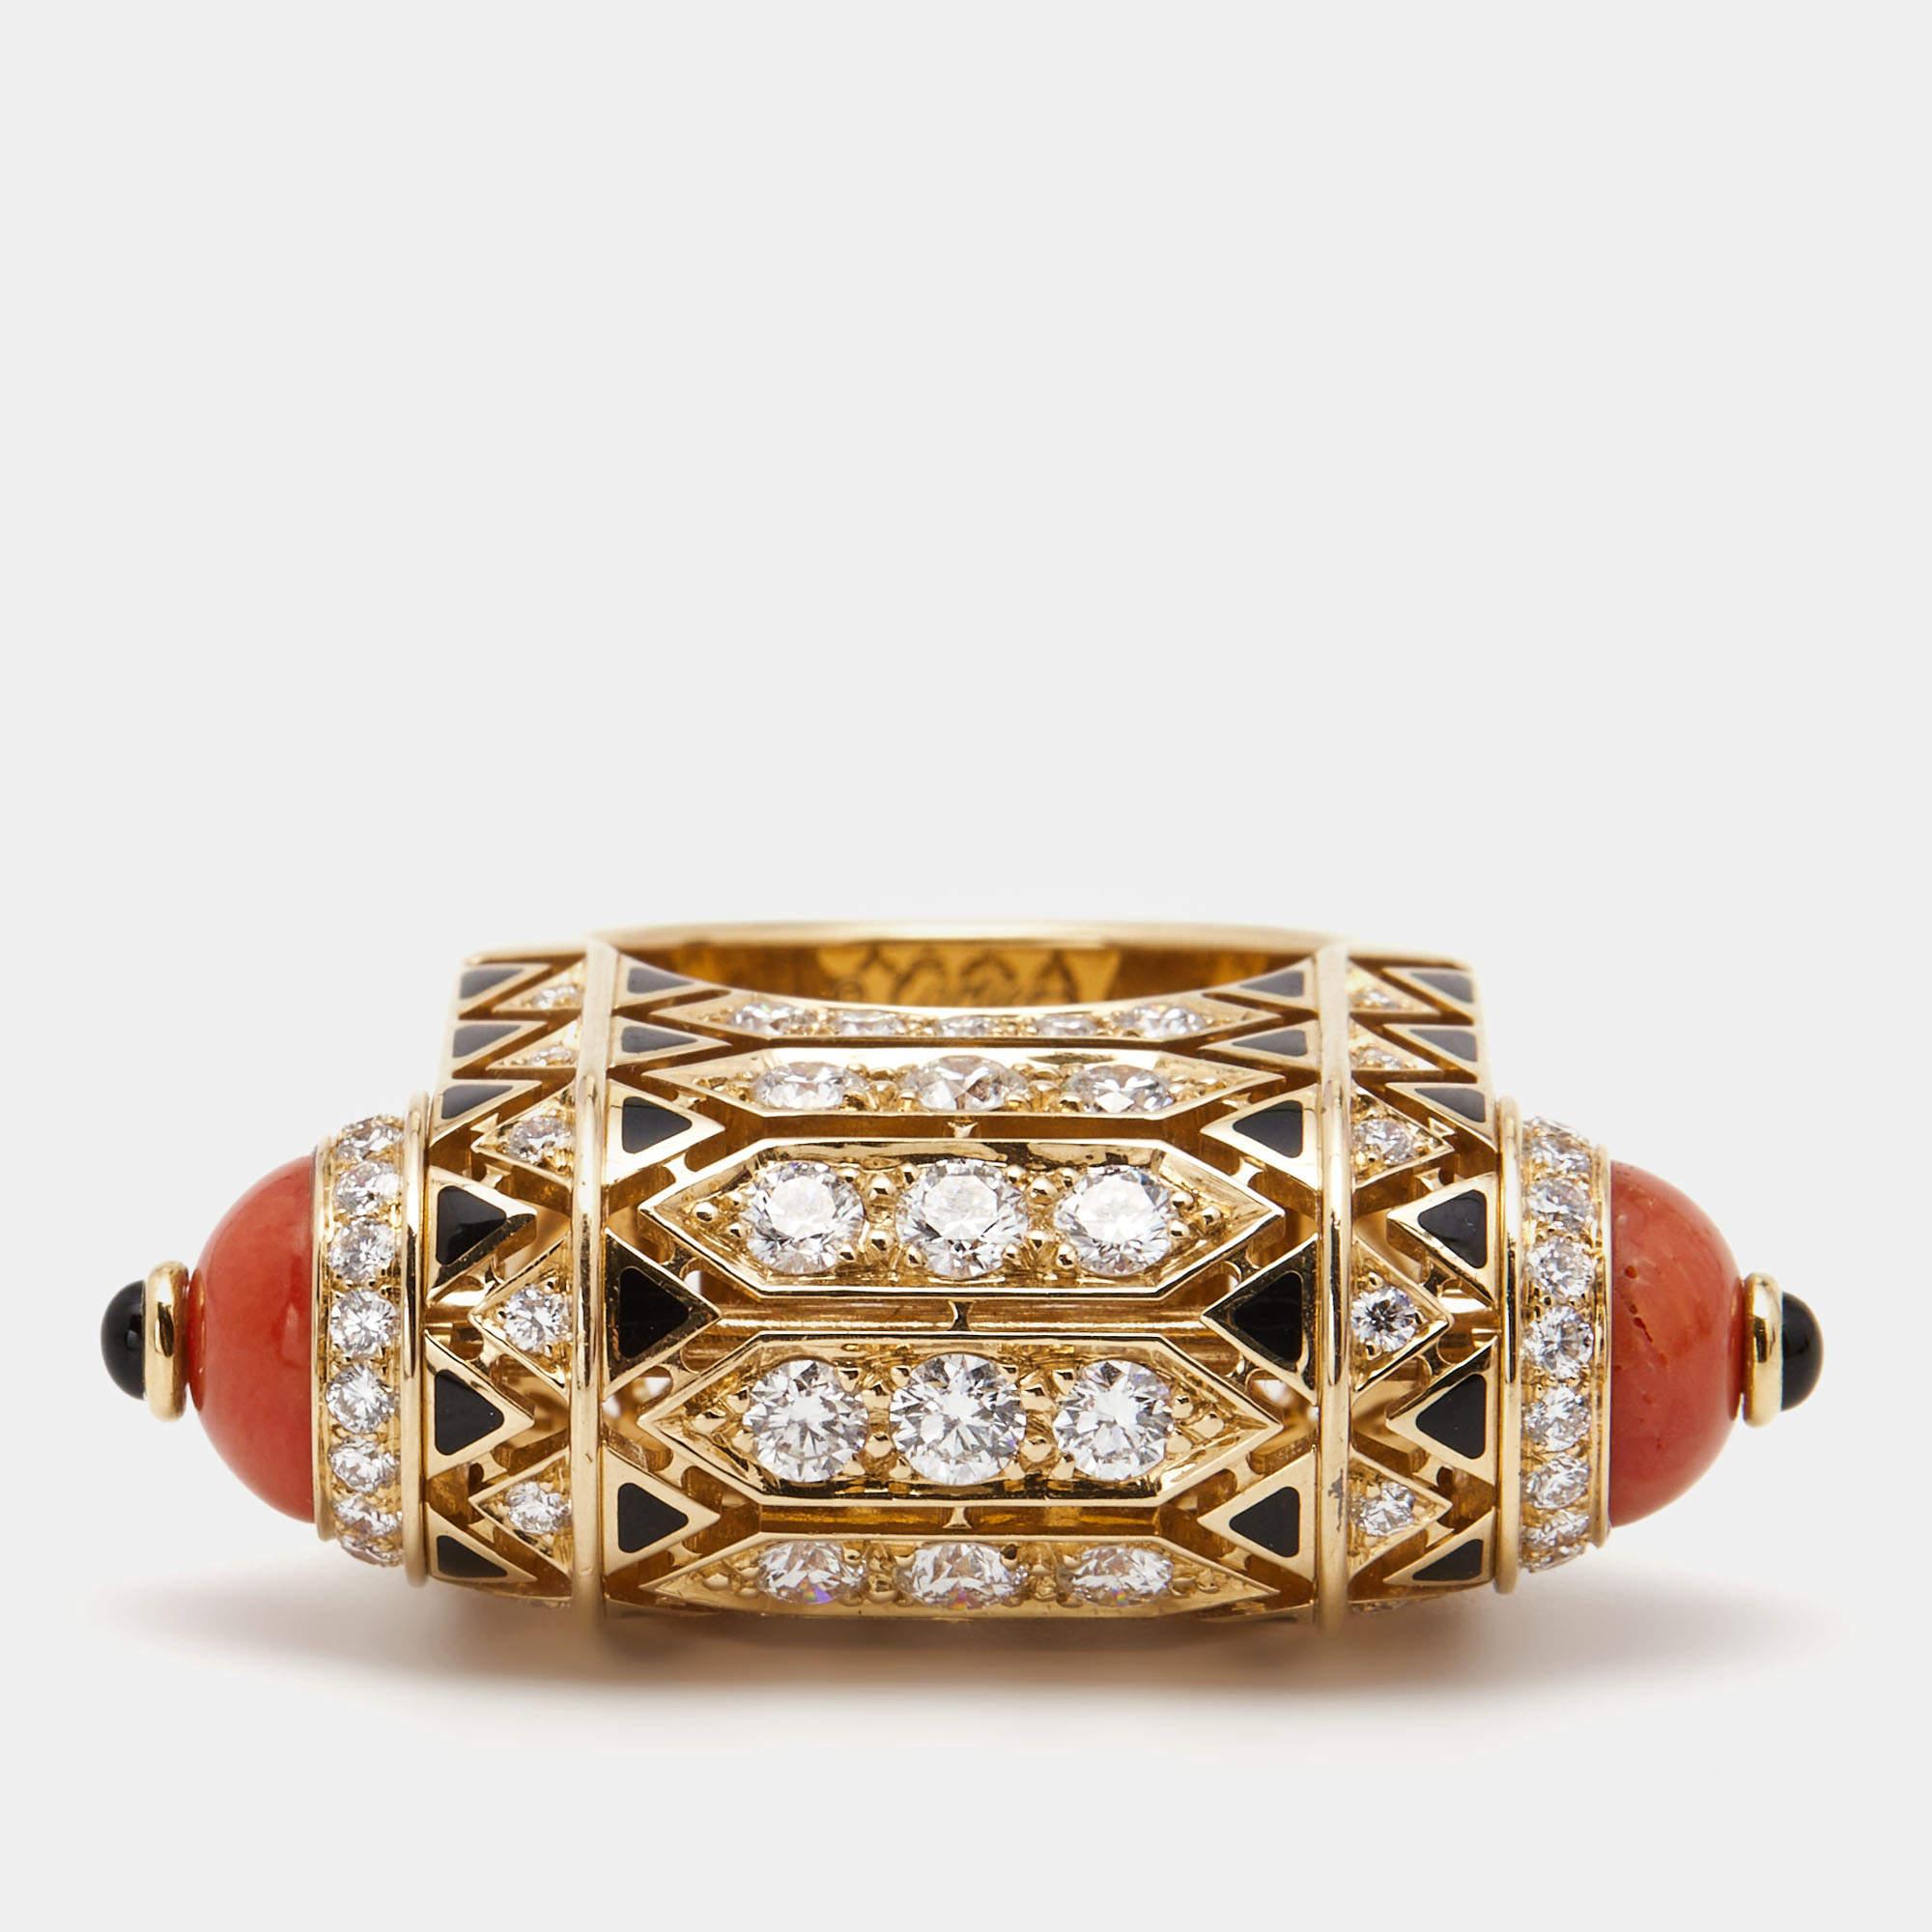 This Cartier cocktail ring is from a collection that plays beautifully with contrasting elements and sculptural lines to create jewels that are modern in appearance and truly classic in spirit. The ring is cast in 18k rose gold, and the design is